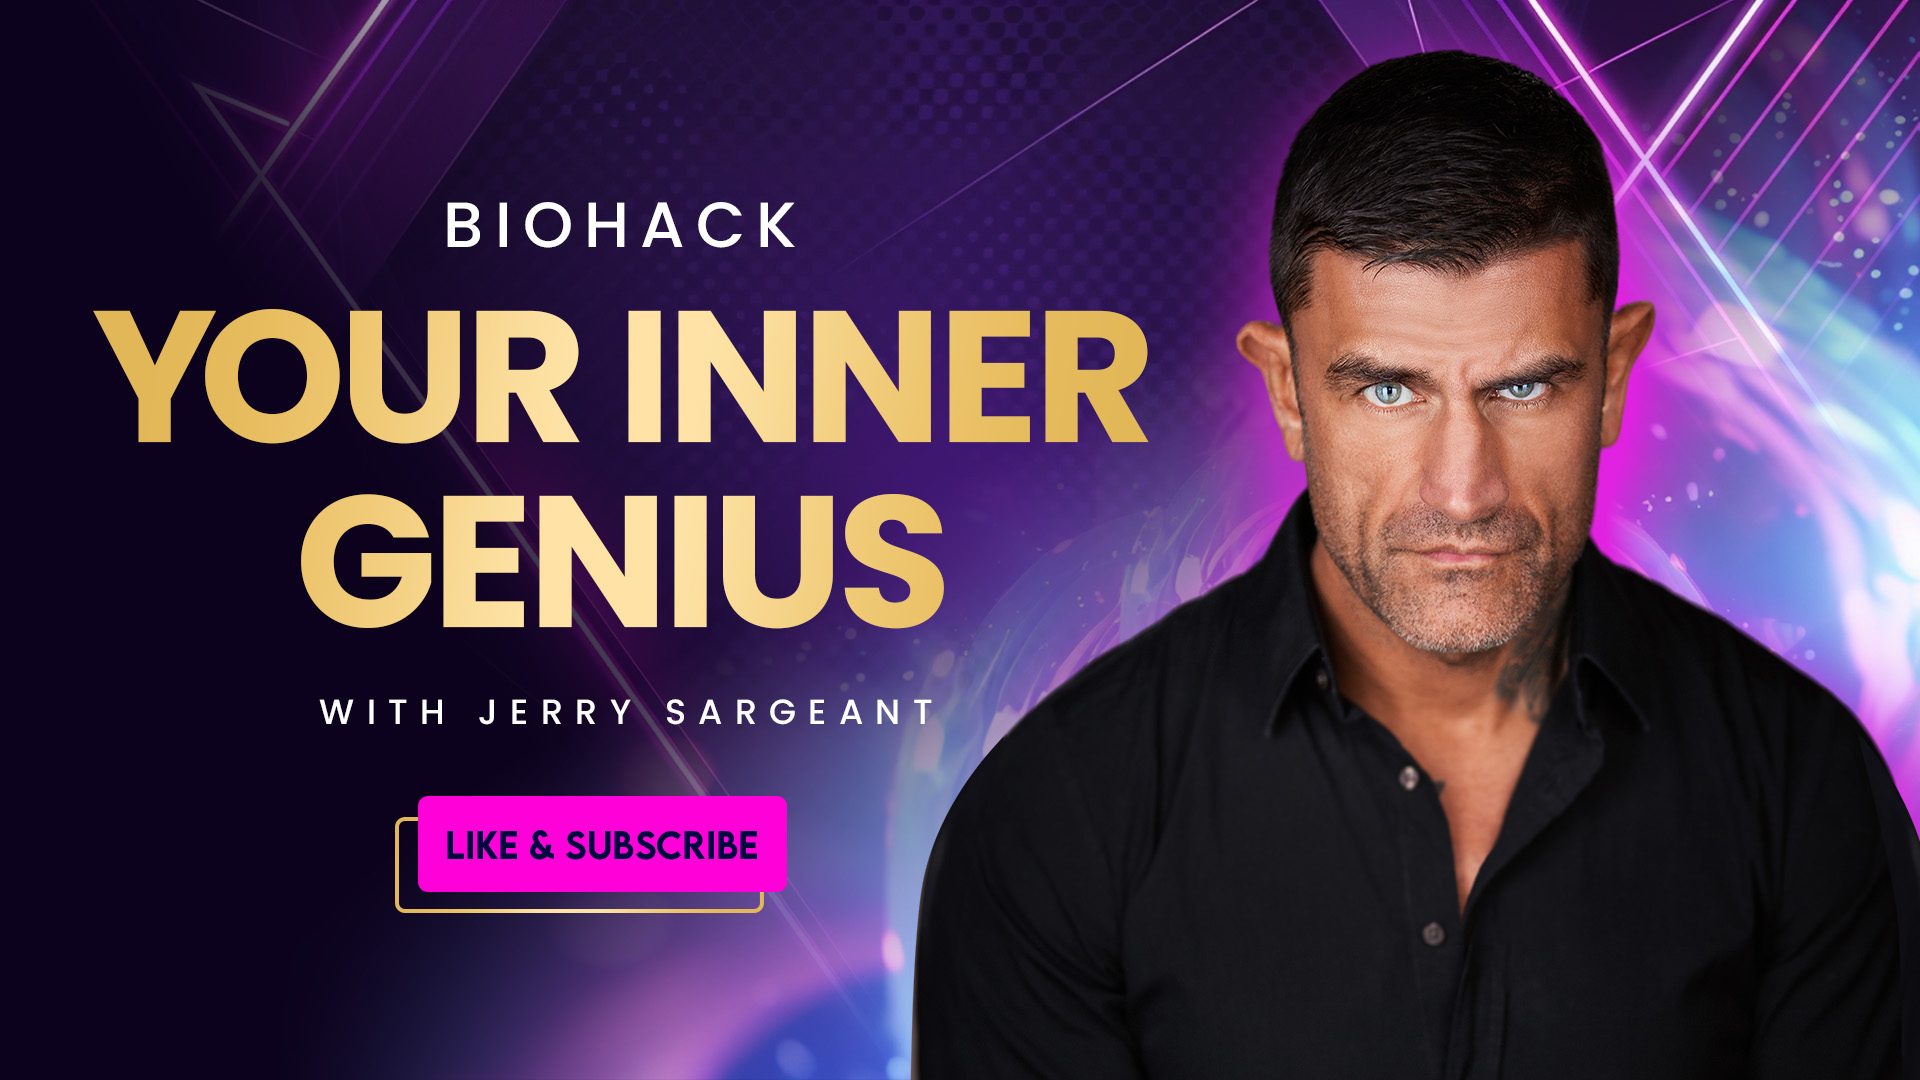 Unleash Your Inner Genius – The Science of Biological Upgrades!